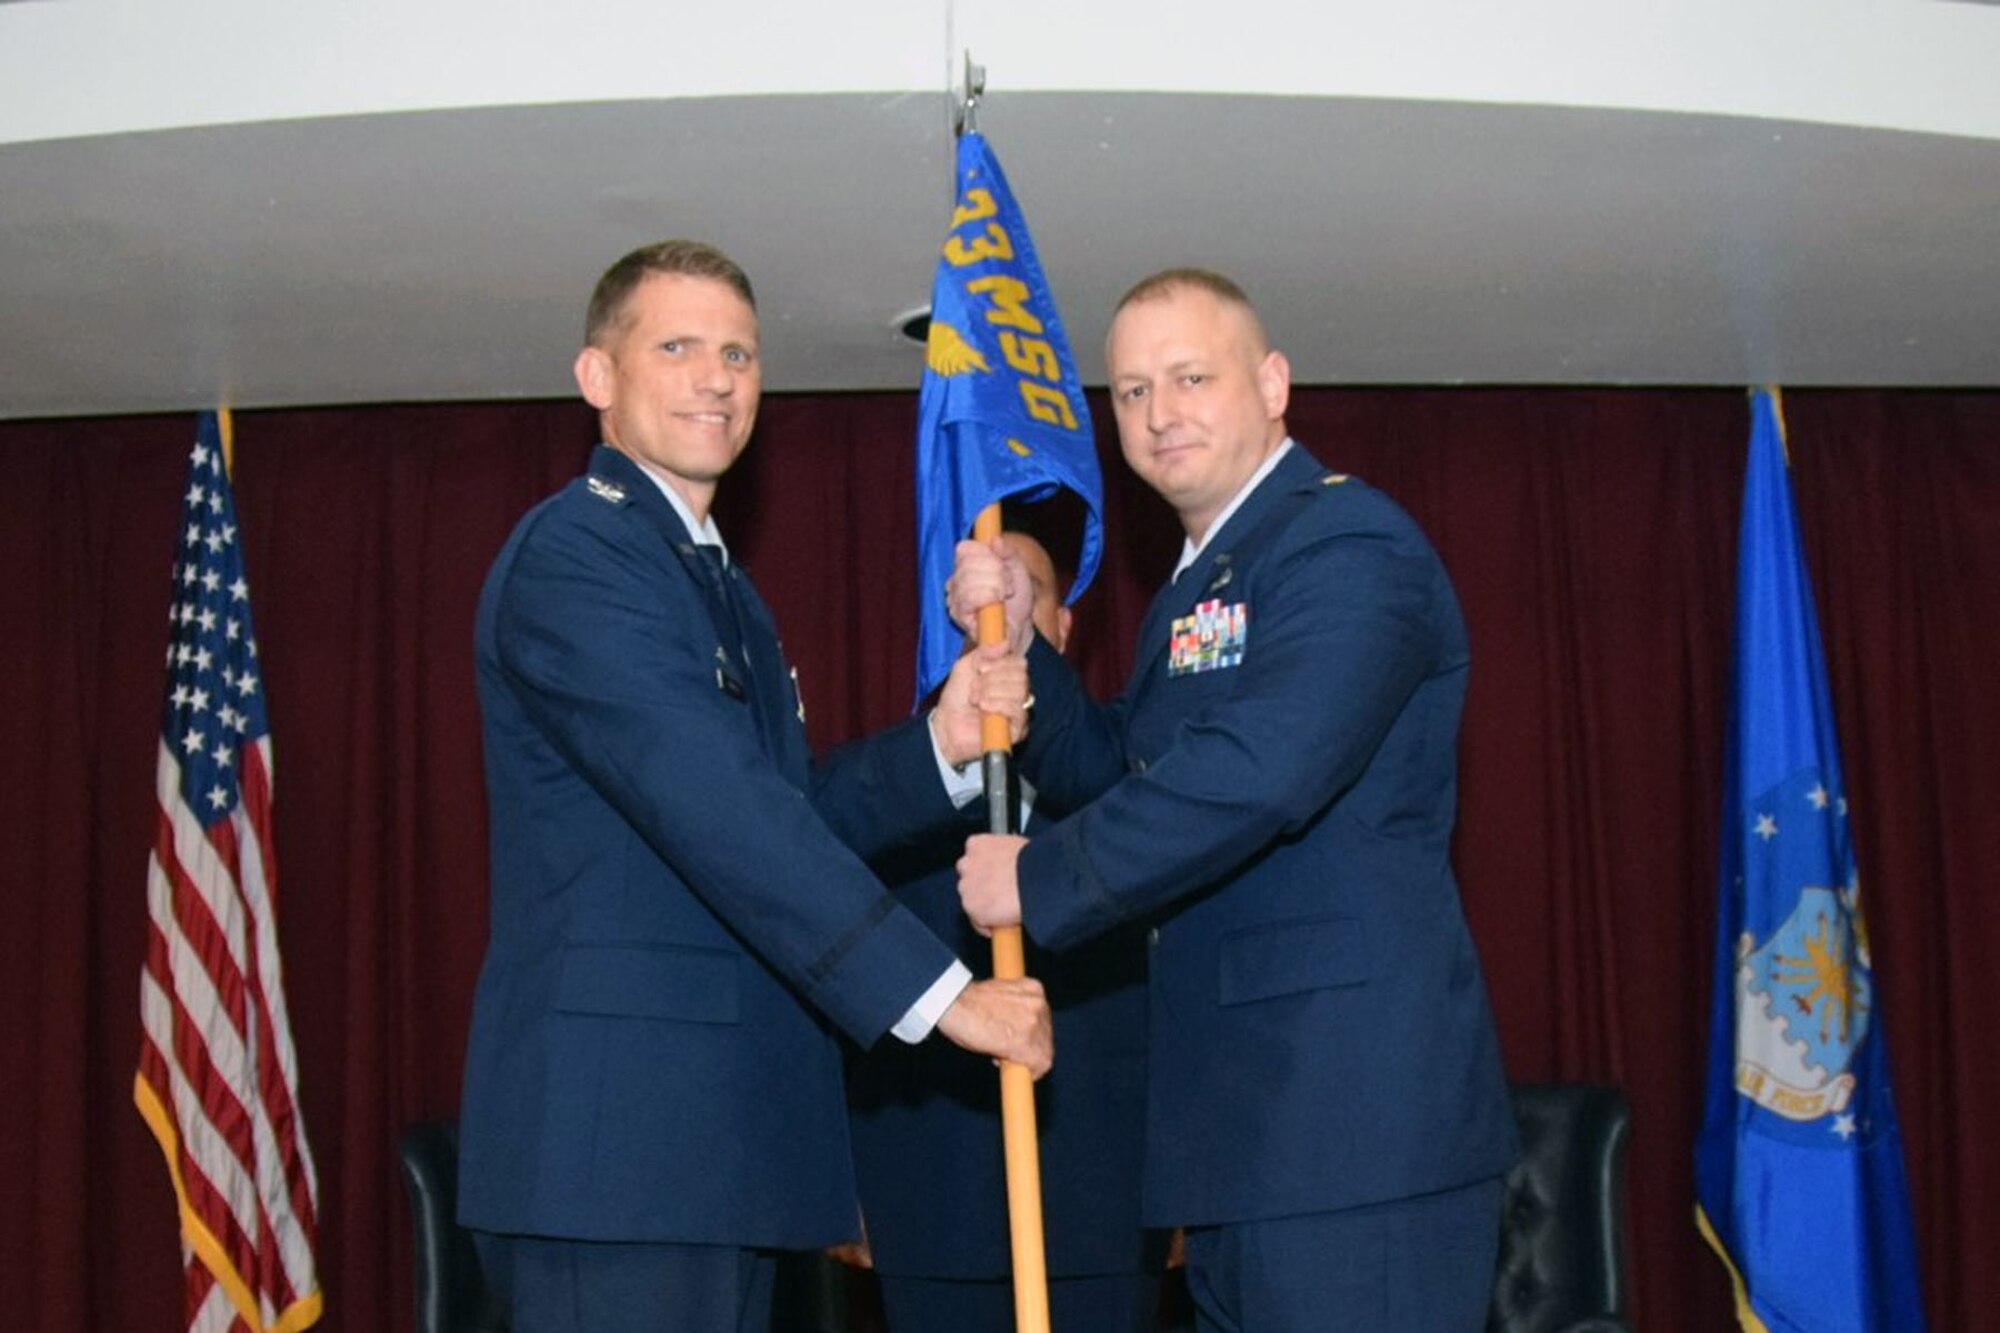 Col. David Enfield, 433rd Mission Support Group commander, hands over the guidon of leadership to Maj. Matthew F. Darisse at an assumption of command ceremony held Oct. 14, 2017. Maj. Darisse started his career as an enlisted Airman in 2003. (Air Force photo by Tech. Sgt. Carlos J. Trevino)